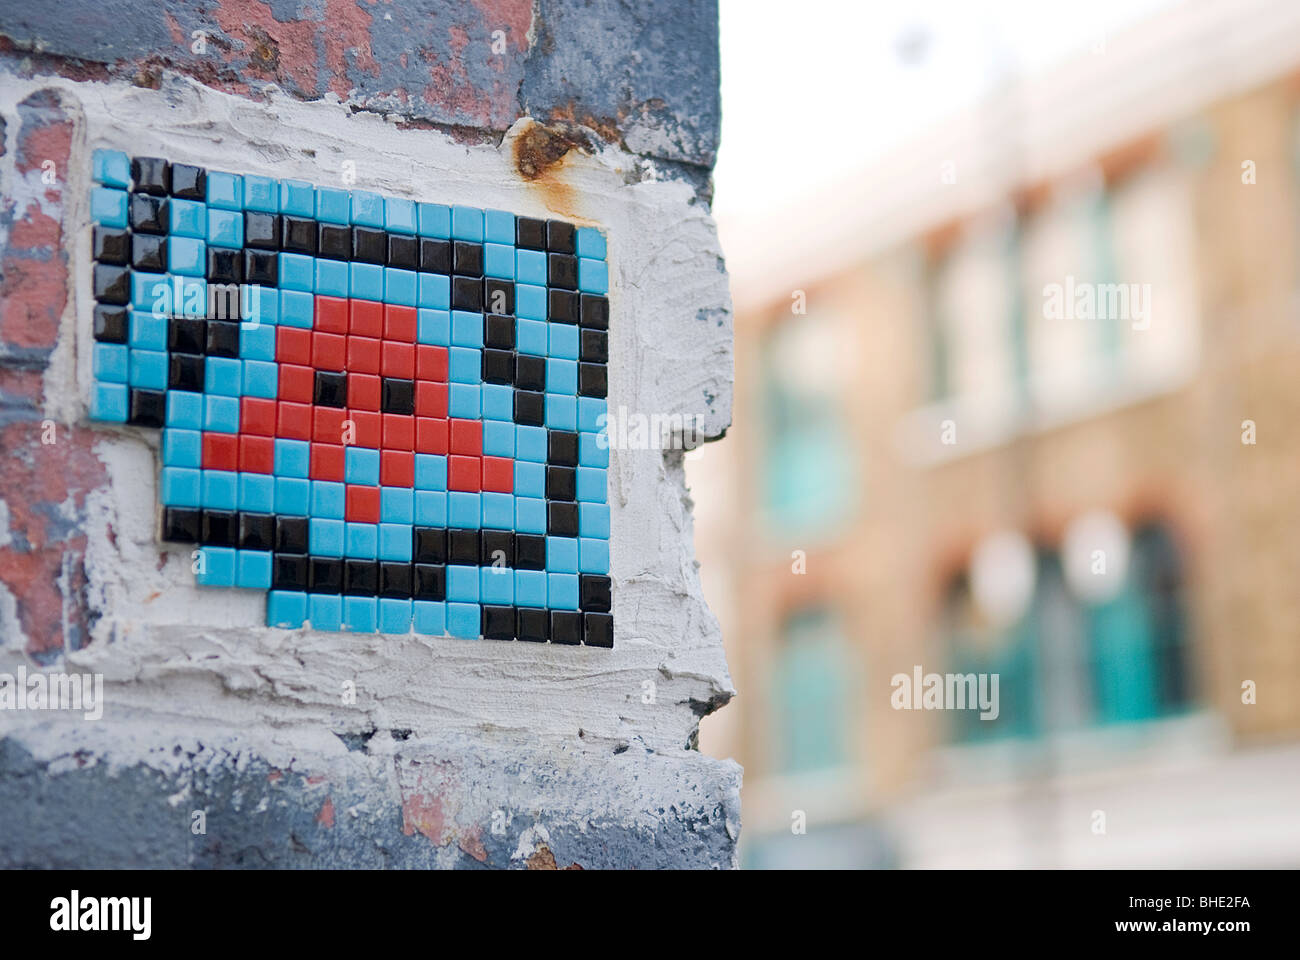 Space invaders in London, England Stock Photo